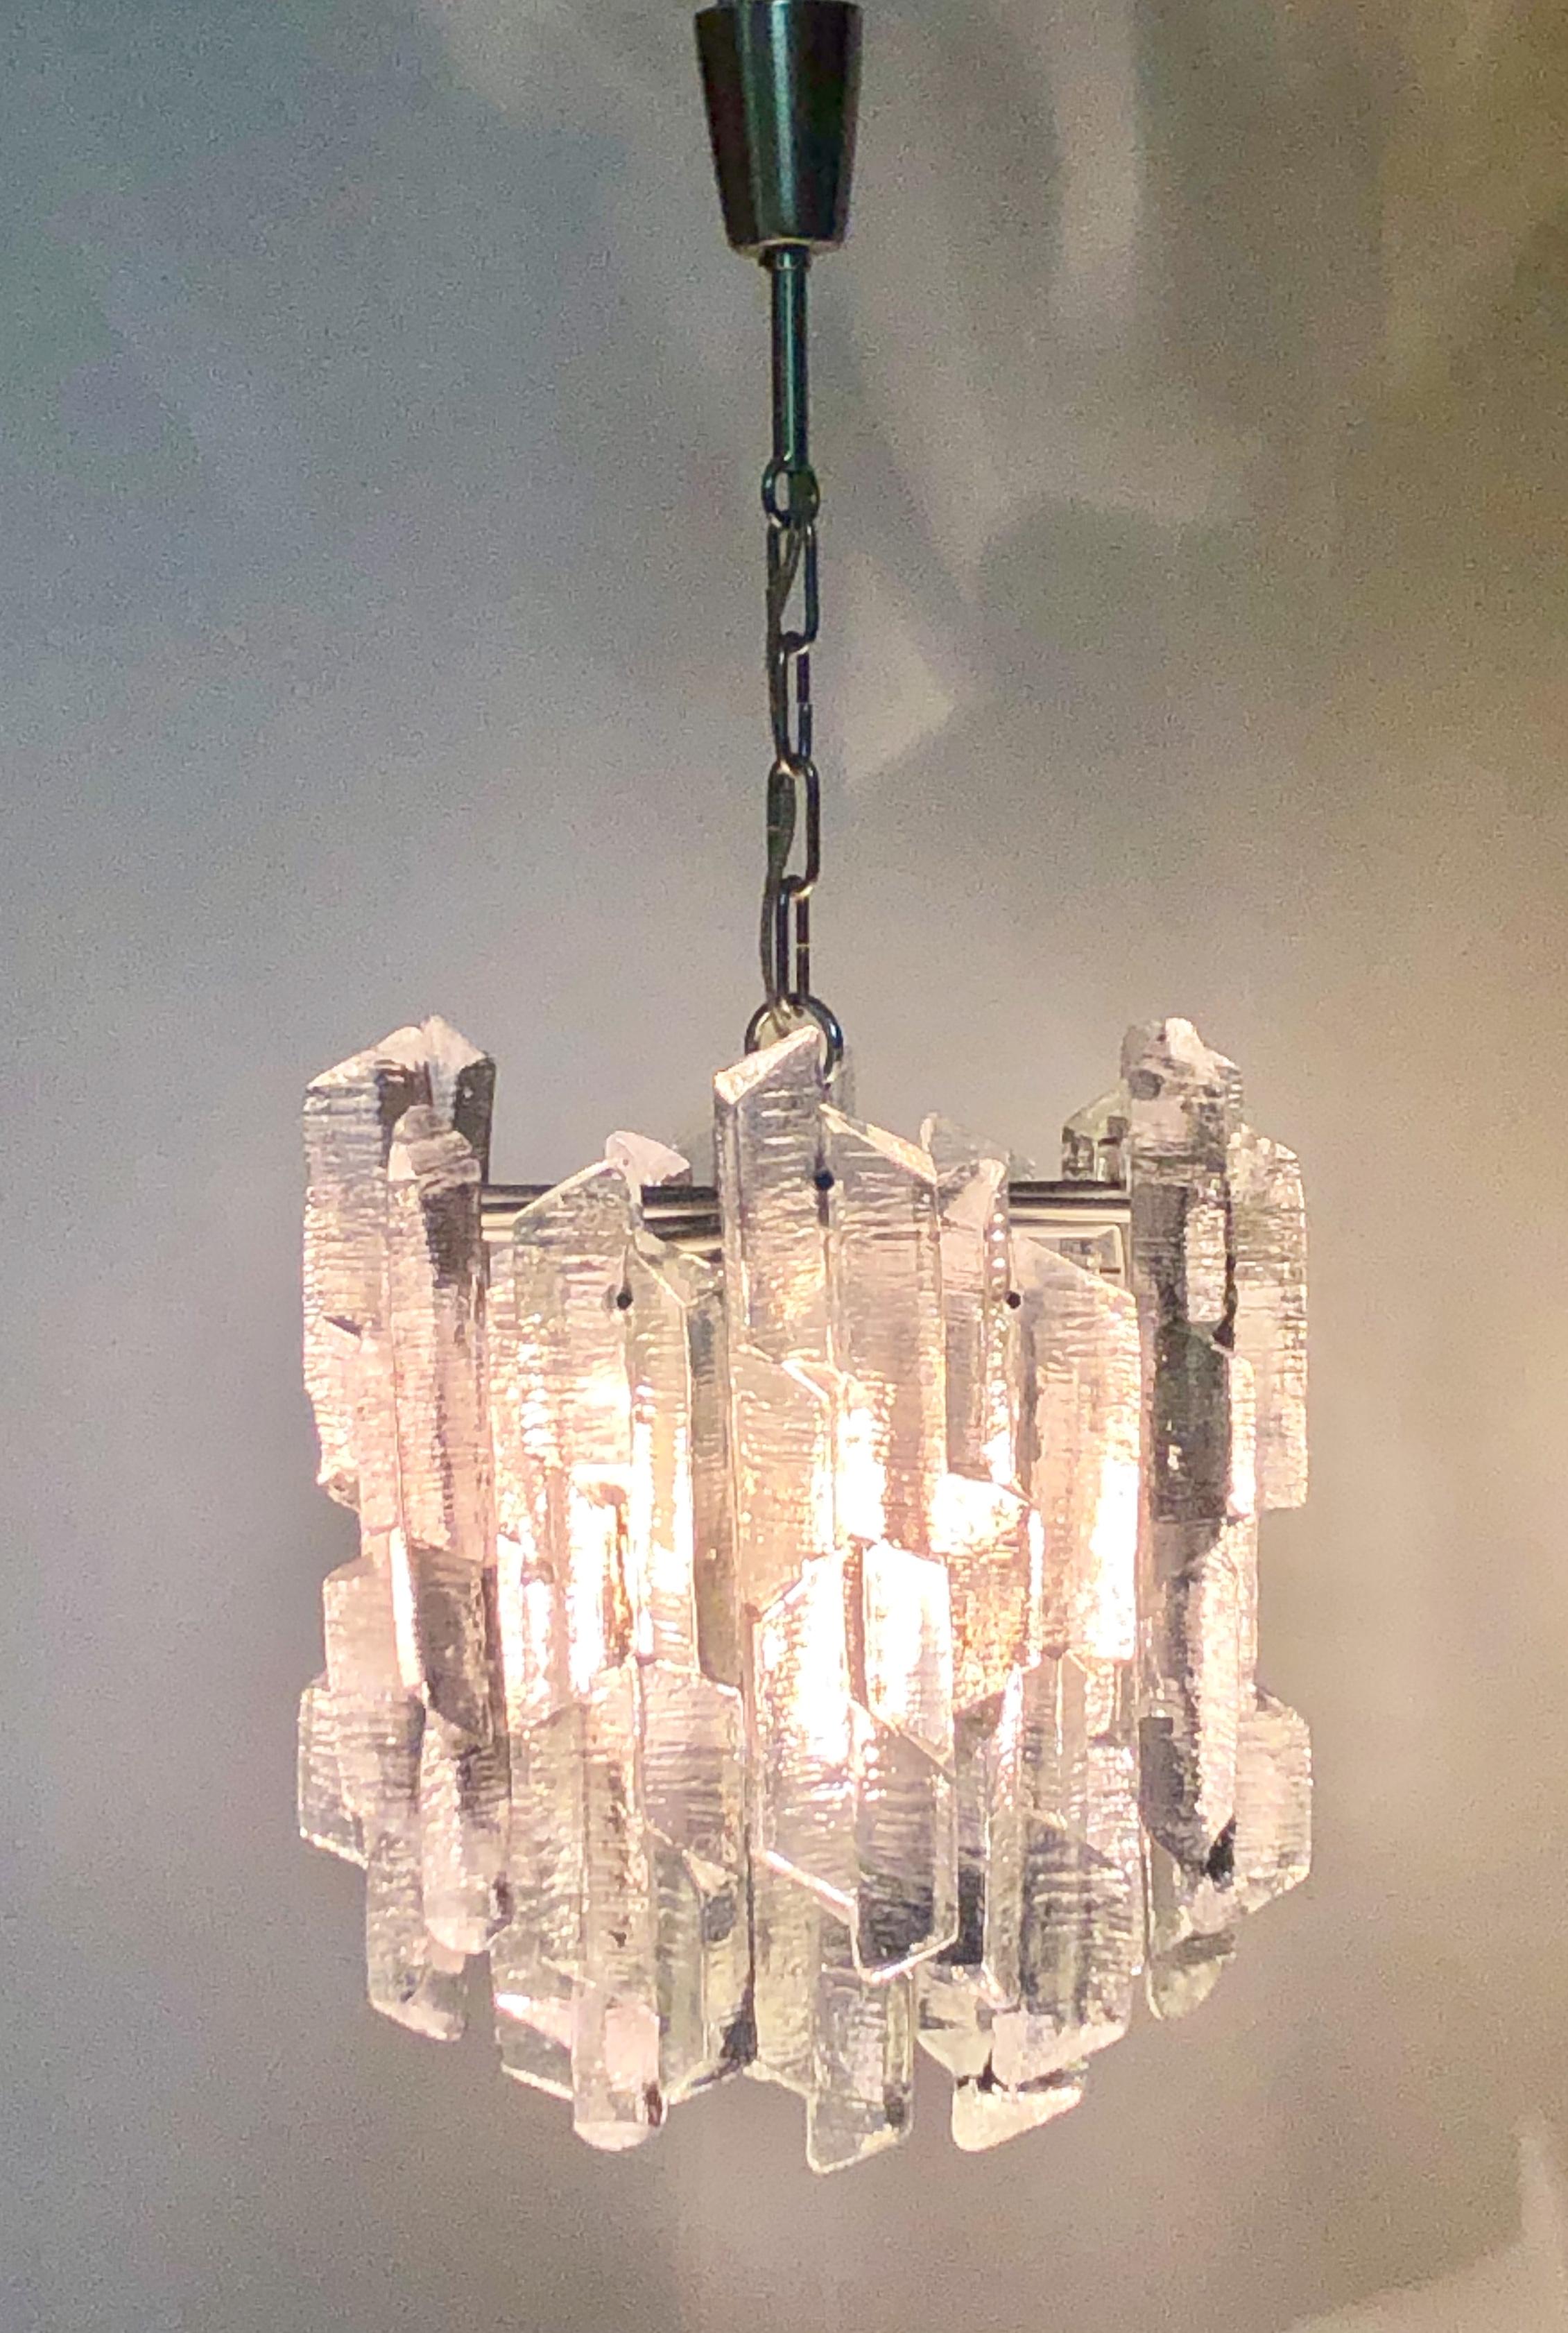 A  rare ice glass chandelier by J.T.Kalmar, Austria, circa 1960s.
The chandelier is made of nickeled metal frame with 18 thick clear Murano structured glass blocks.
Socket: 6 x e14 and 1 x e27 (for standard screw bulbs).
Weight: ca. 25 kg.

New